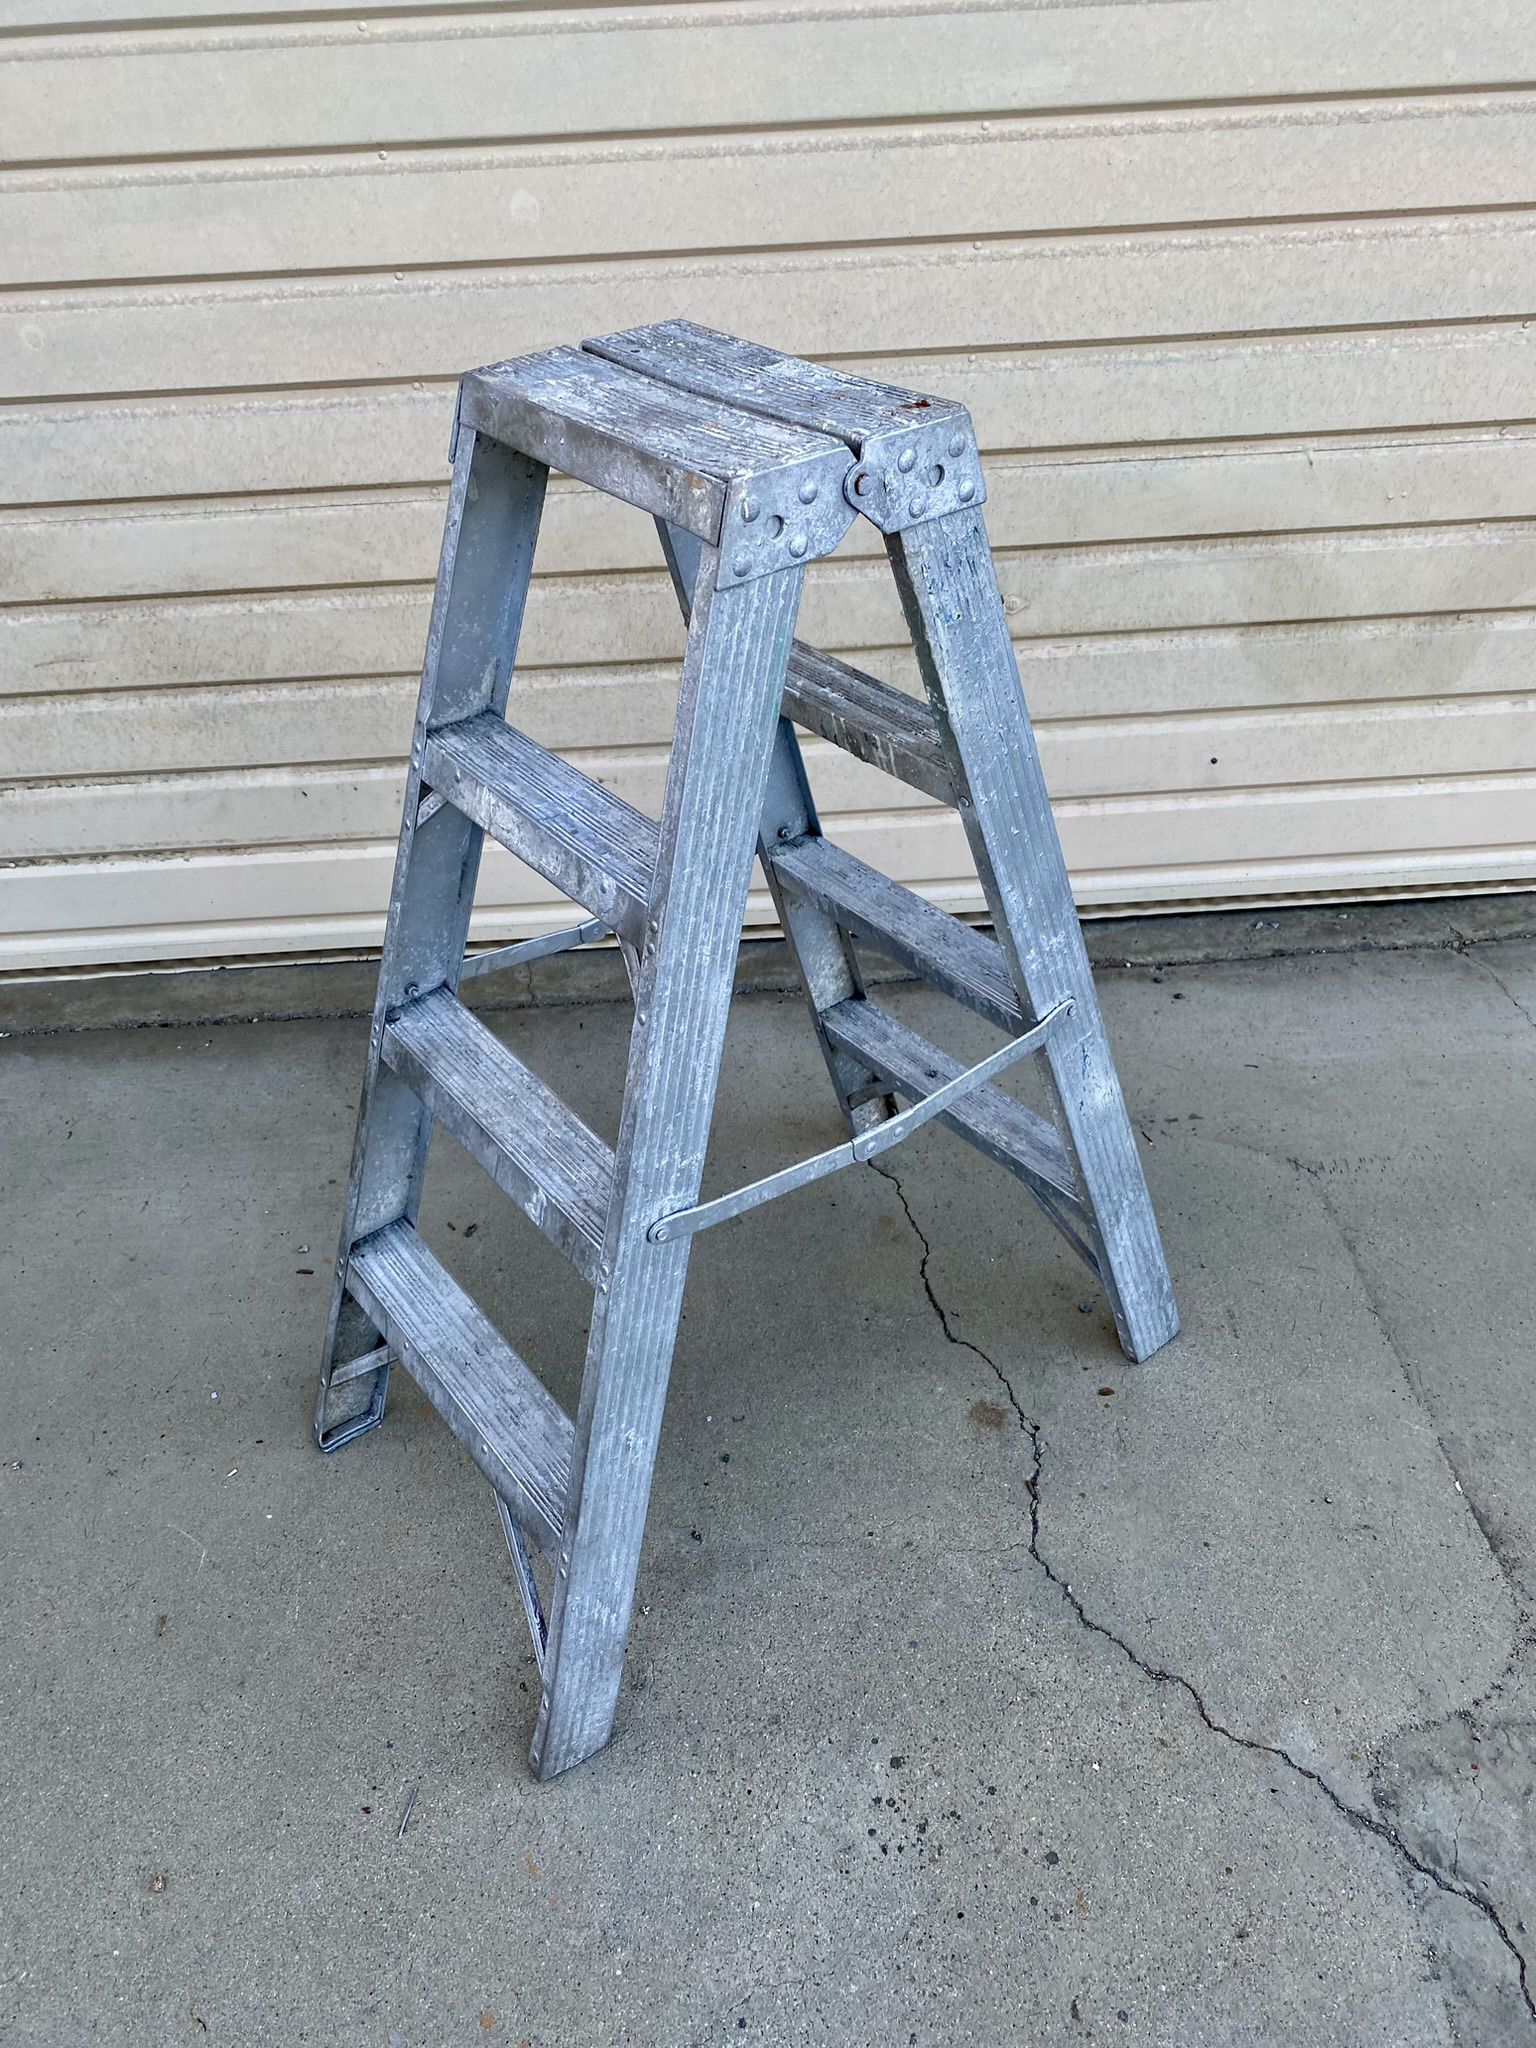 Commercial 4’ Twin Aluminum Ladder $100 Cash In Ontario 91762. 4 feet foot